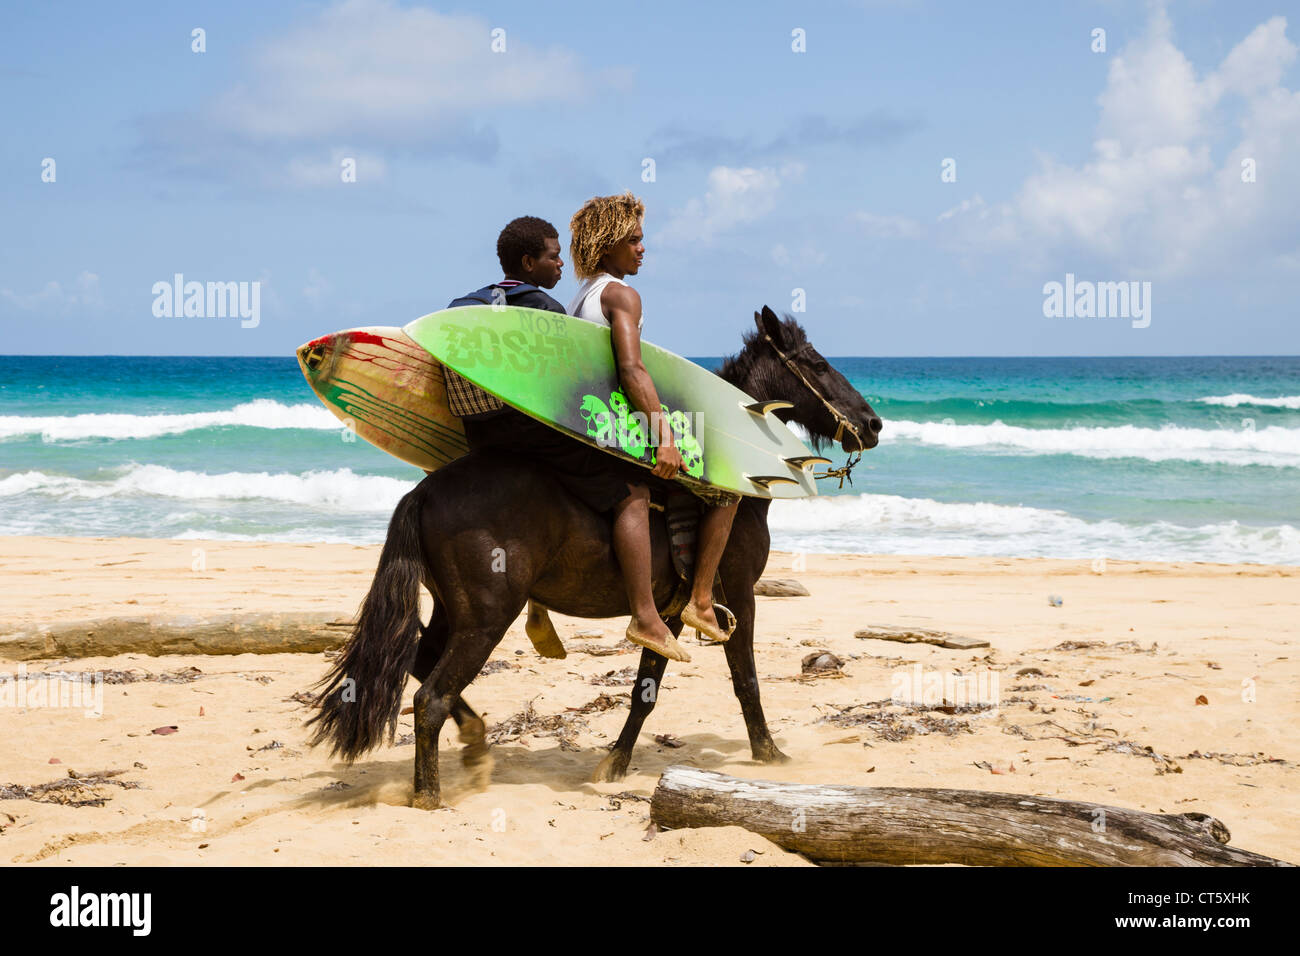 Pair of surfers on a horse at Wizard Beach (First Beach) on Isla Bastimentos, Bocas del Toro, Panama. Stock Photo